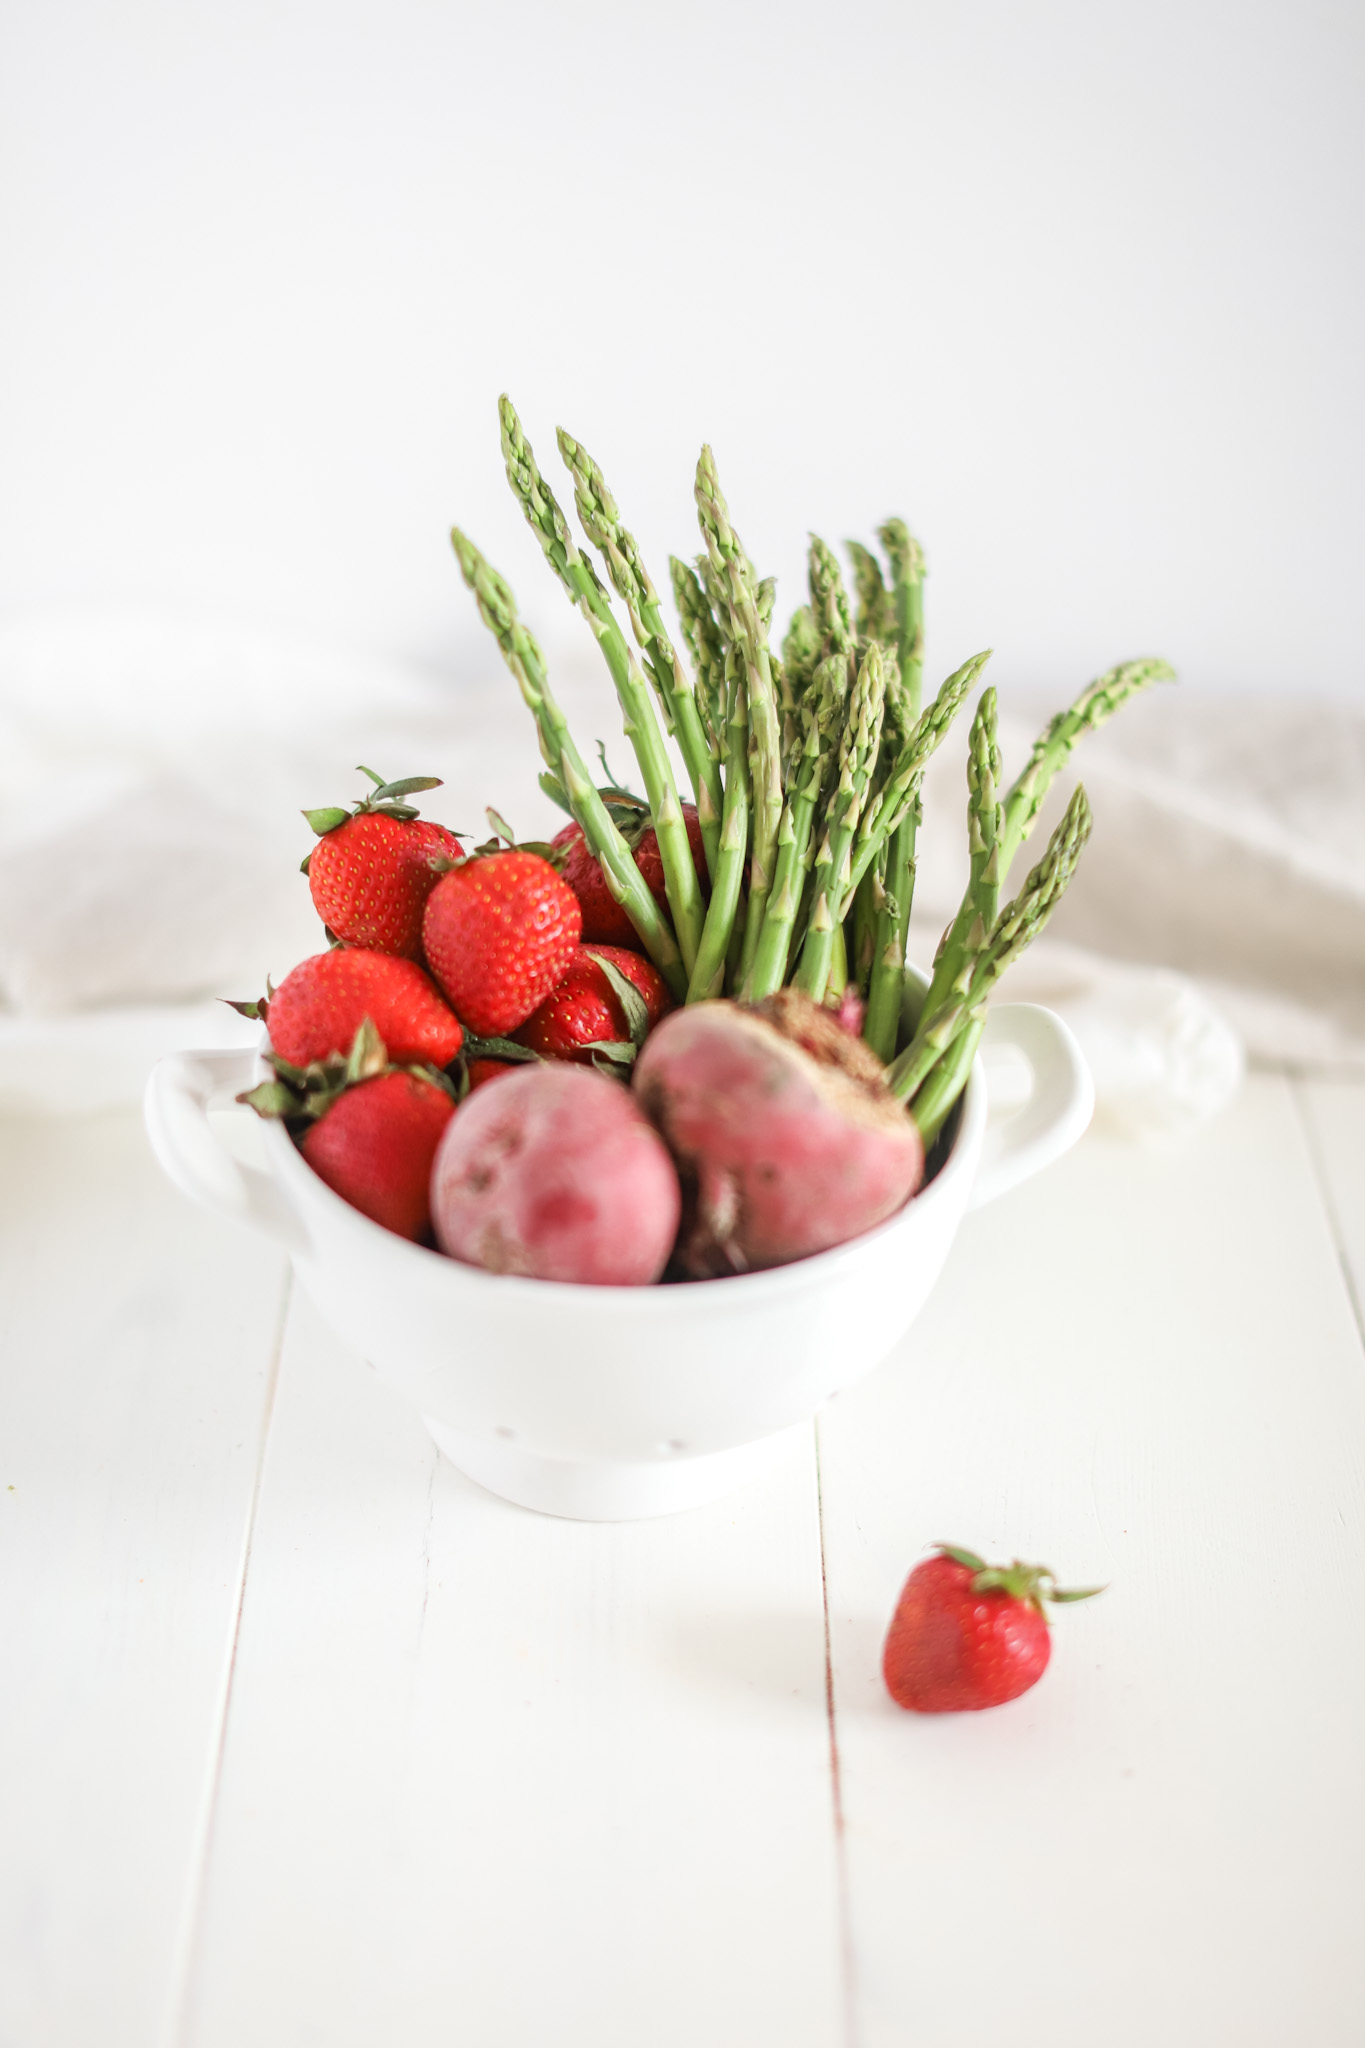 strawberries, beats and asparagus for the spring asparagus salad